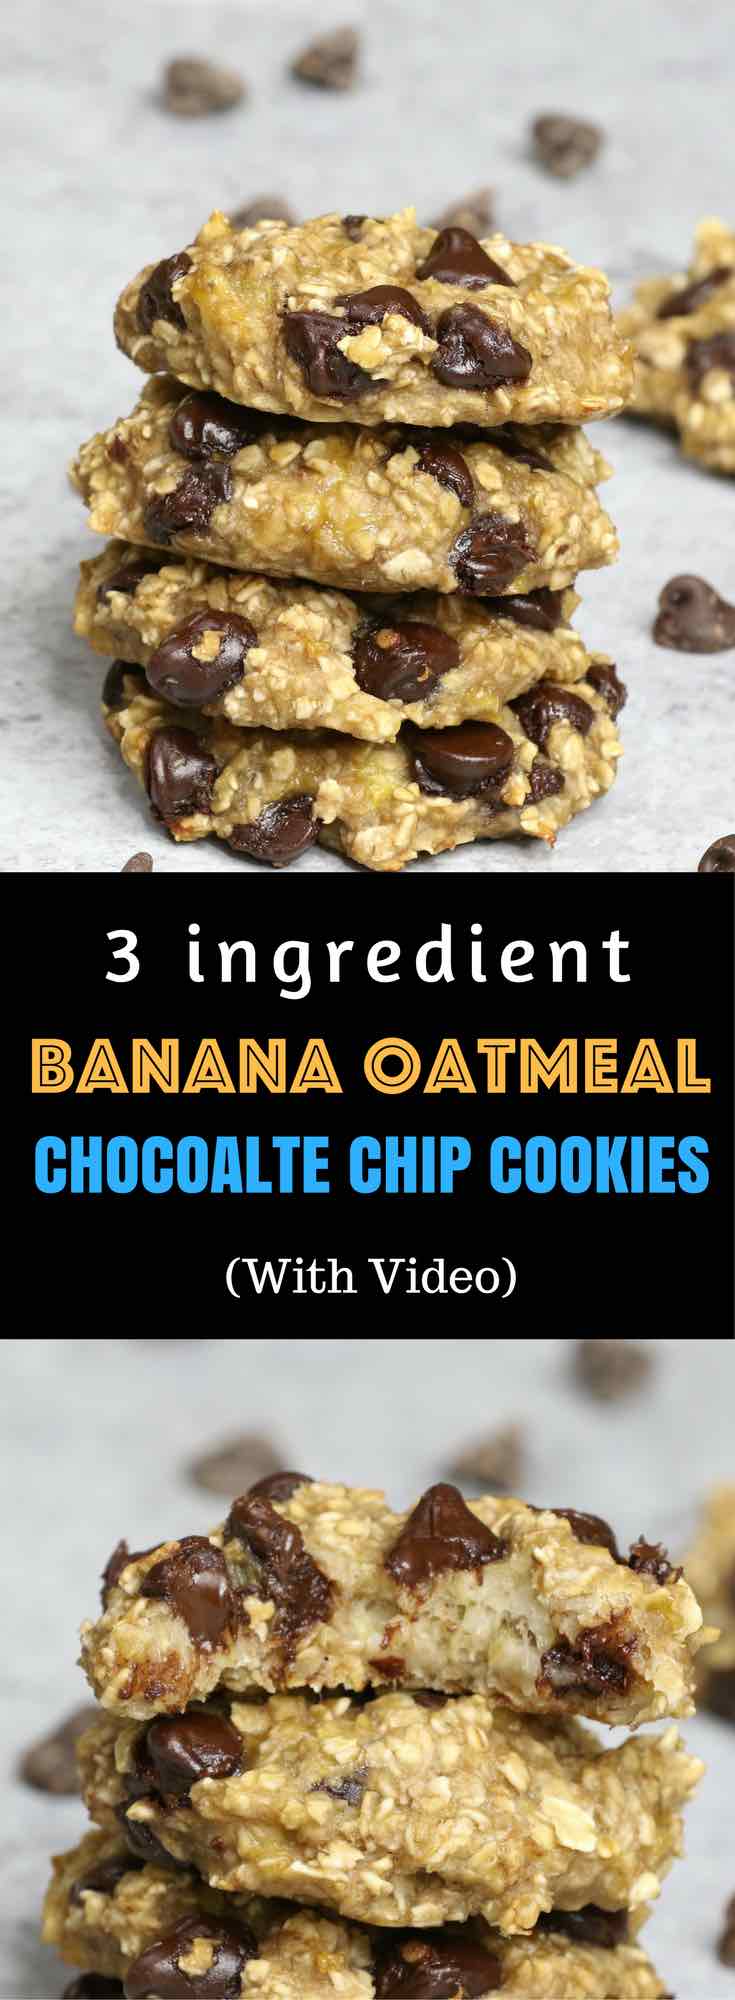 Banana Oatmeal Chocolate Chip Cookies – Soft, chewy, and super easy cookies. All you need is only 3 ingredients: two ripe bananas, some oats and a handful of chocolate chips. Gluten-free, dairy-free, quick and easy recipe. Vegetarian. Video Recipe.